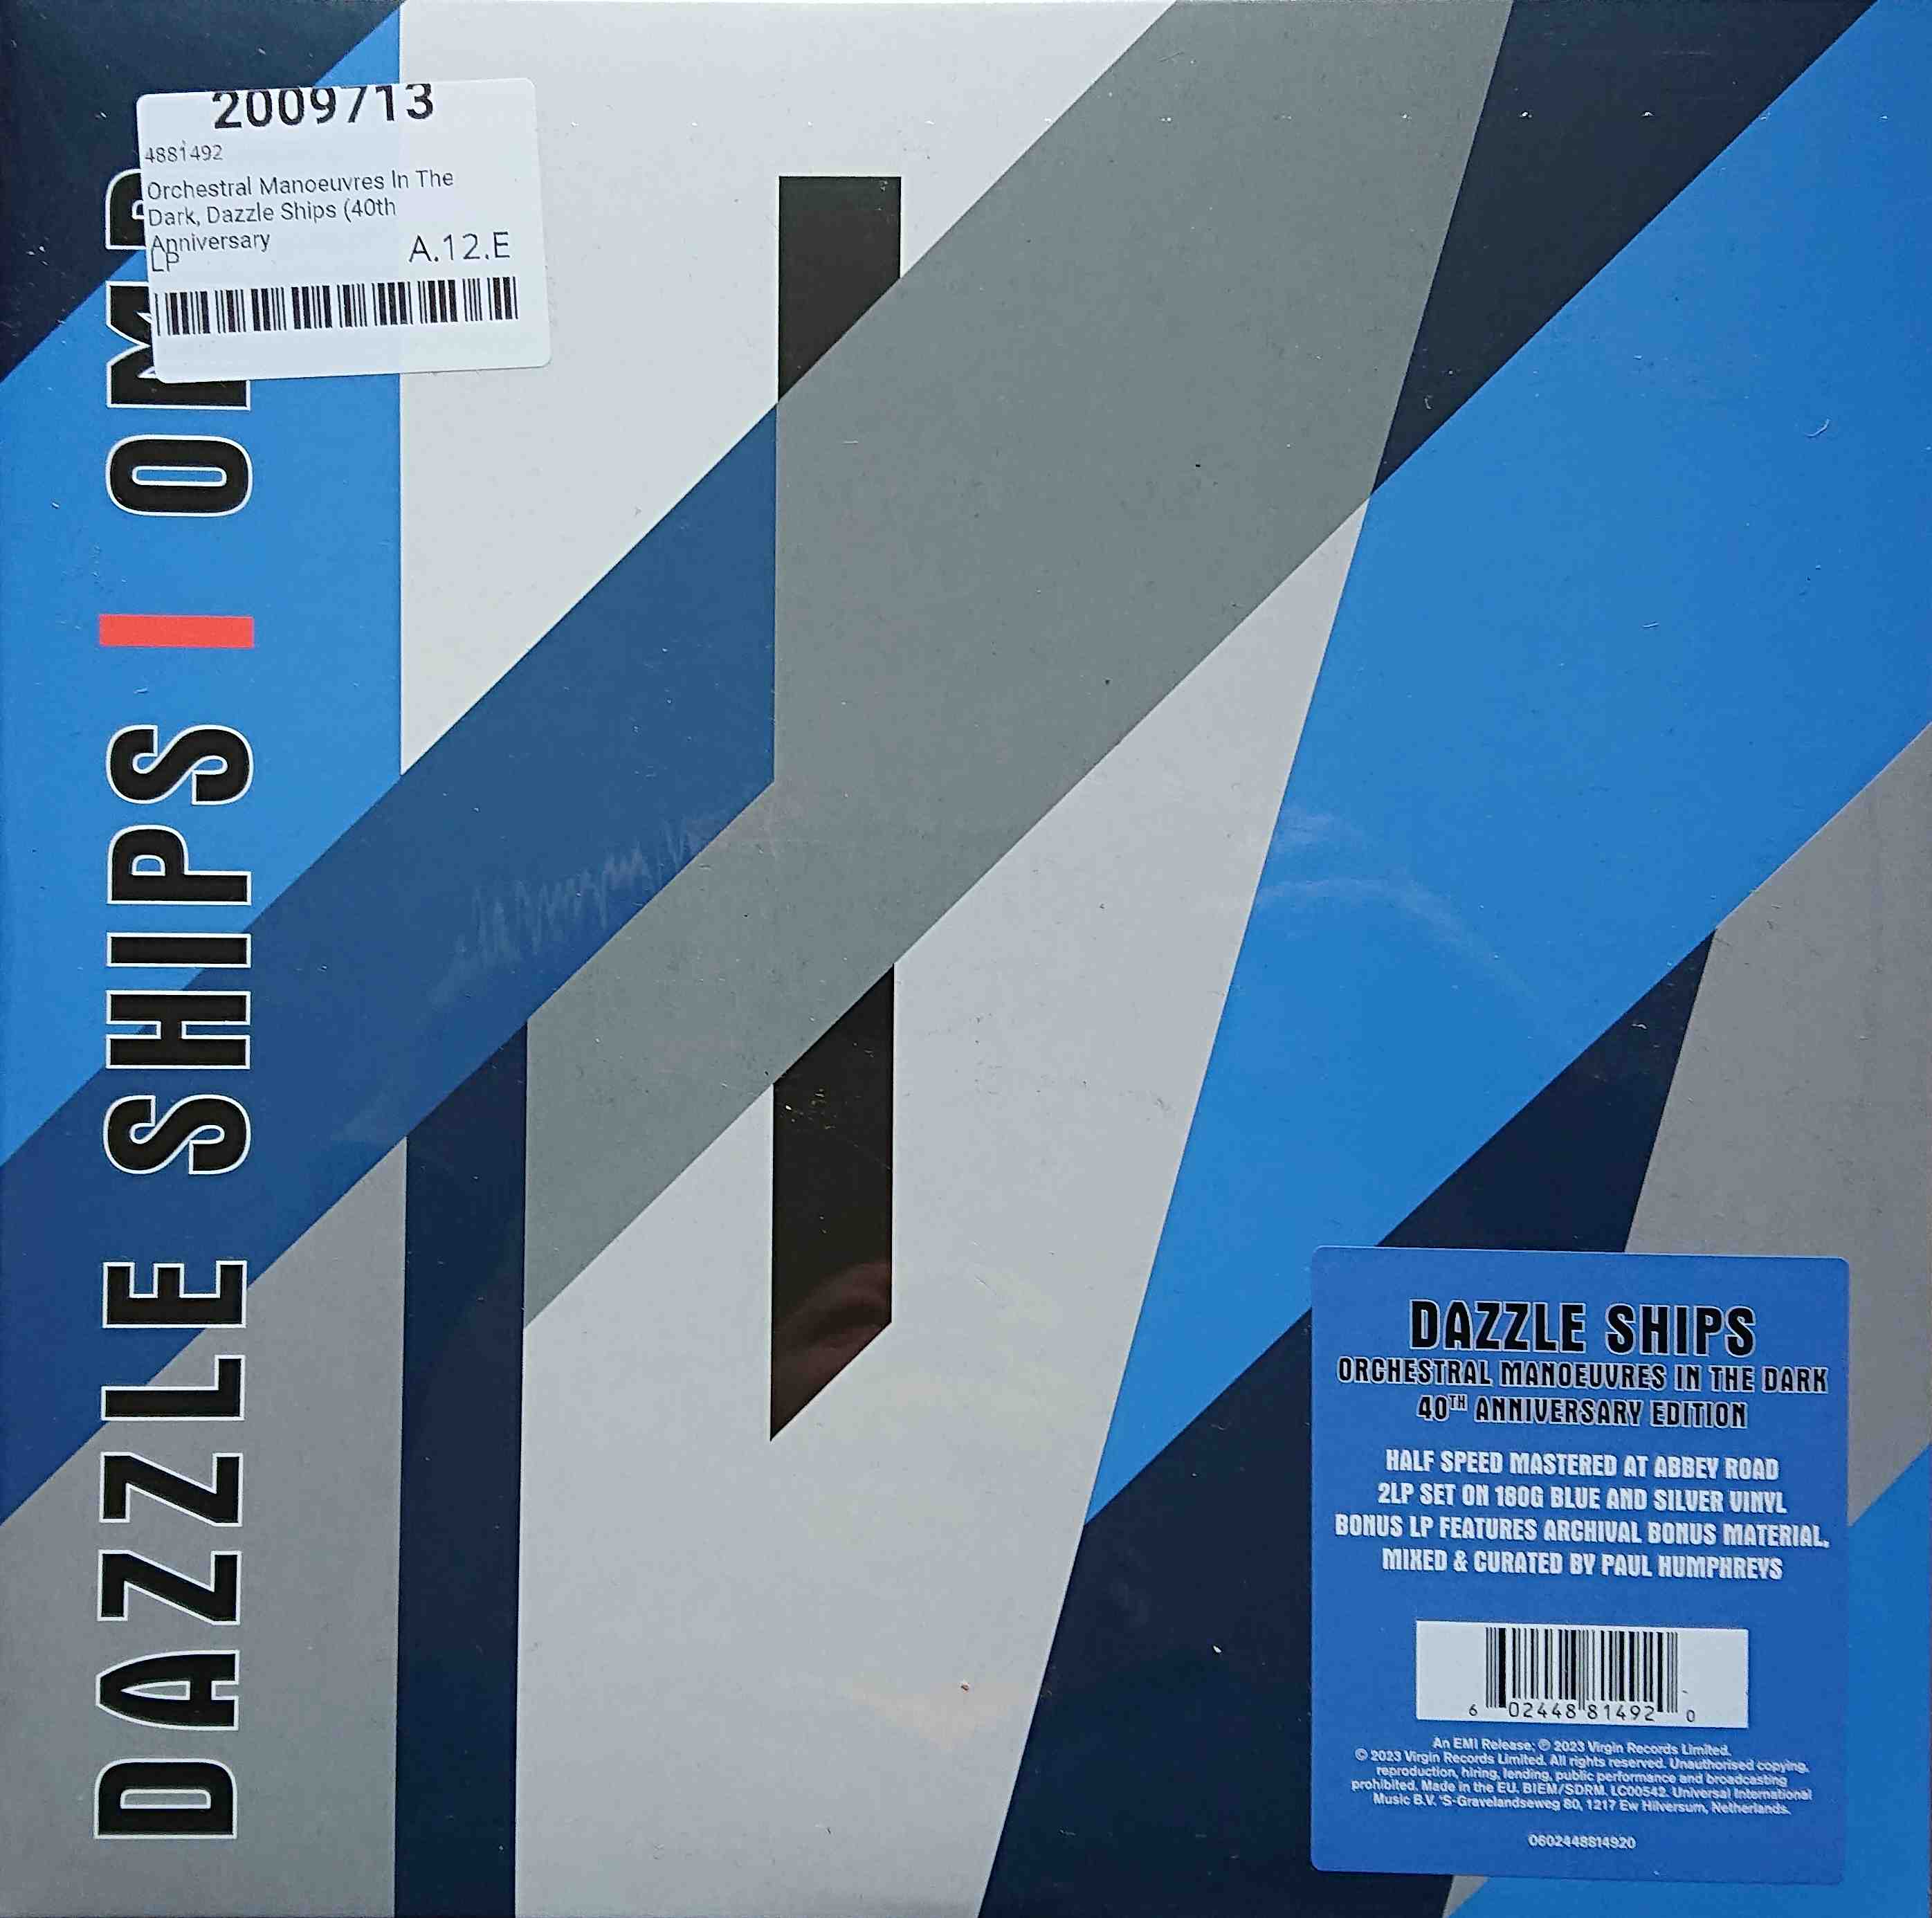 Picture of 060244814920 Dazzle ships (40th anniversary) by artist Orchestral Manoeuvres in the Dark (OMD)